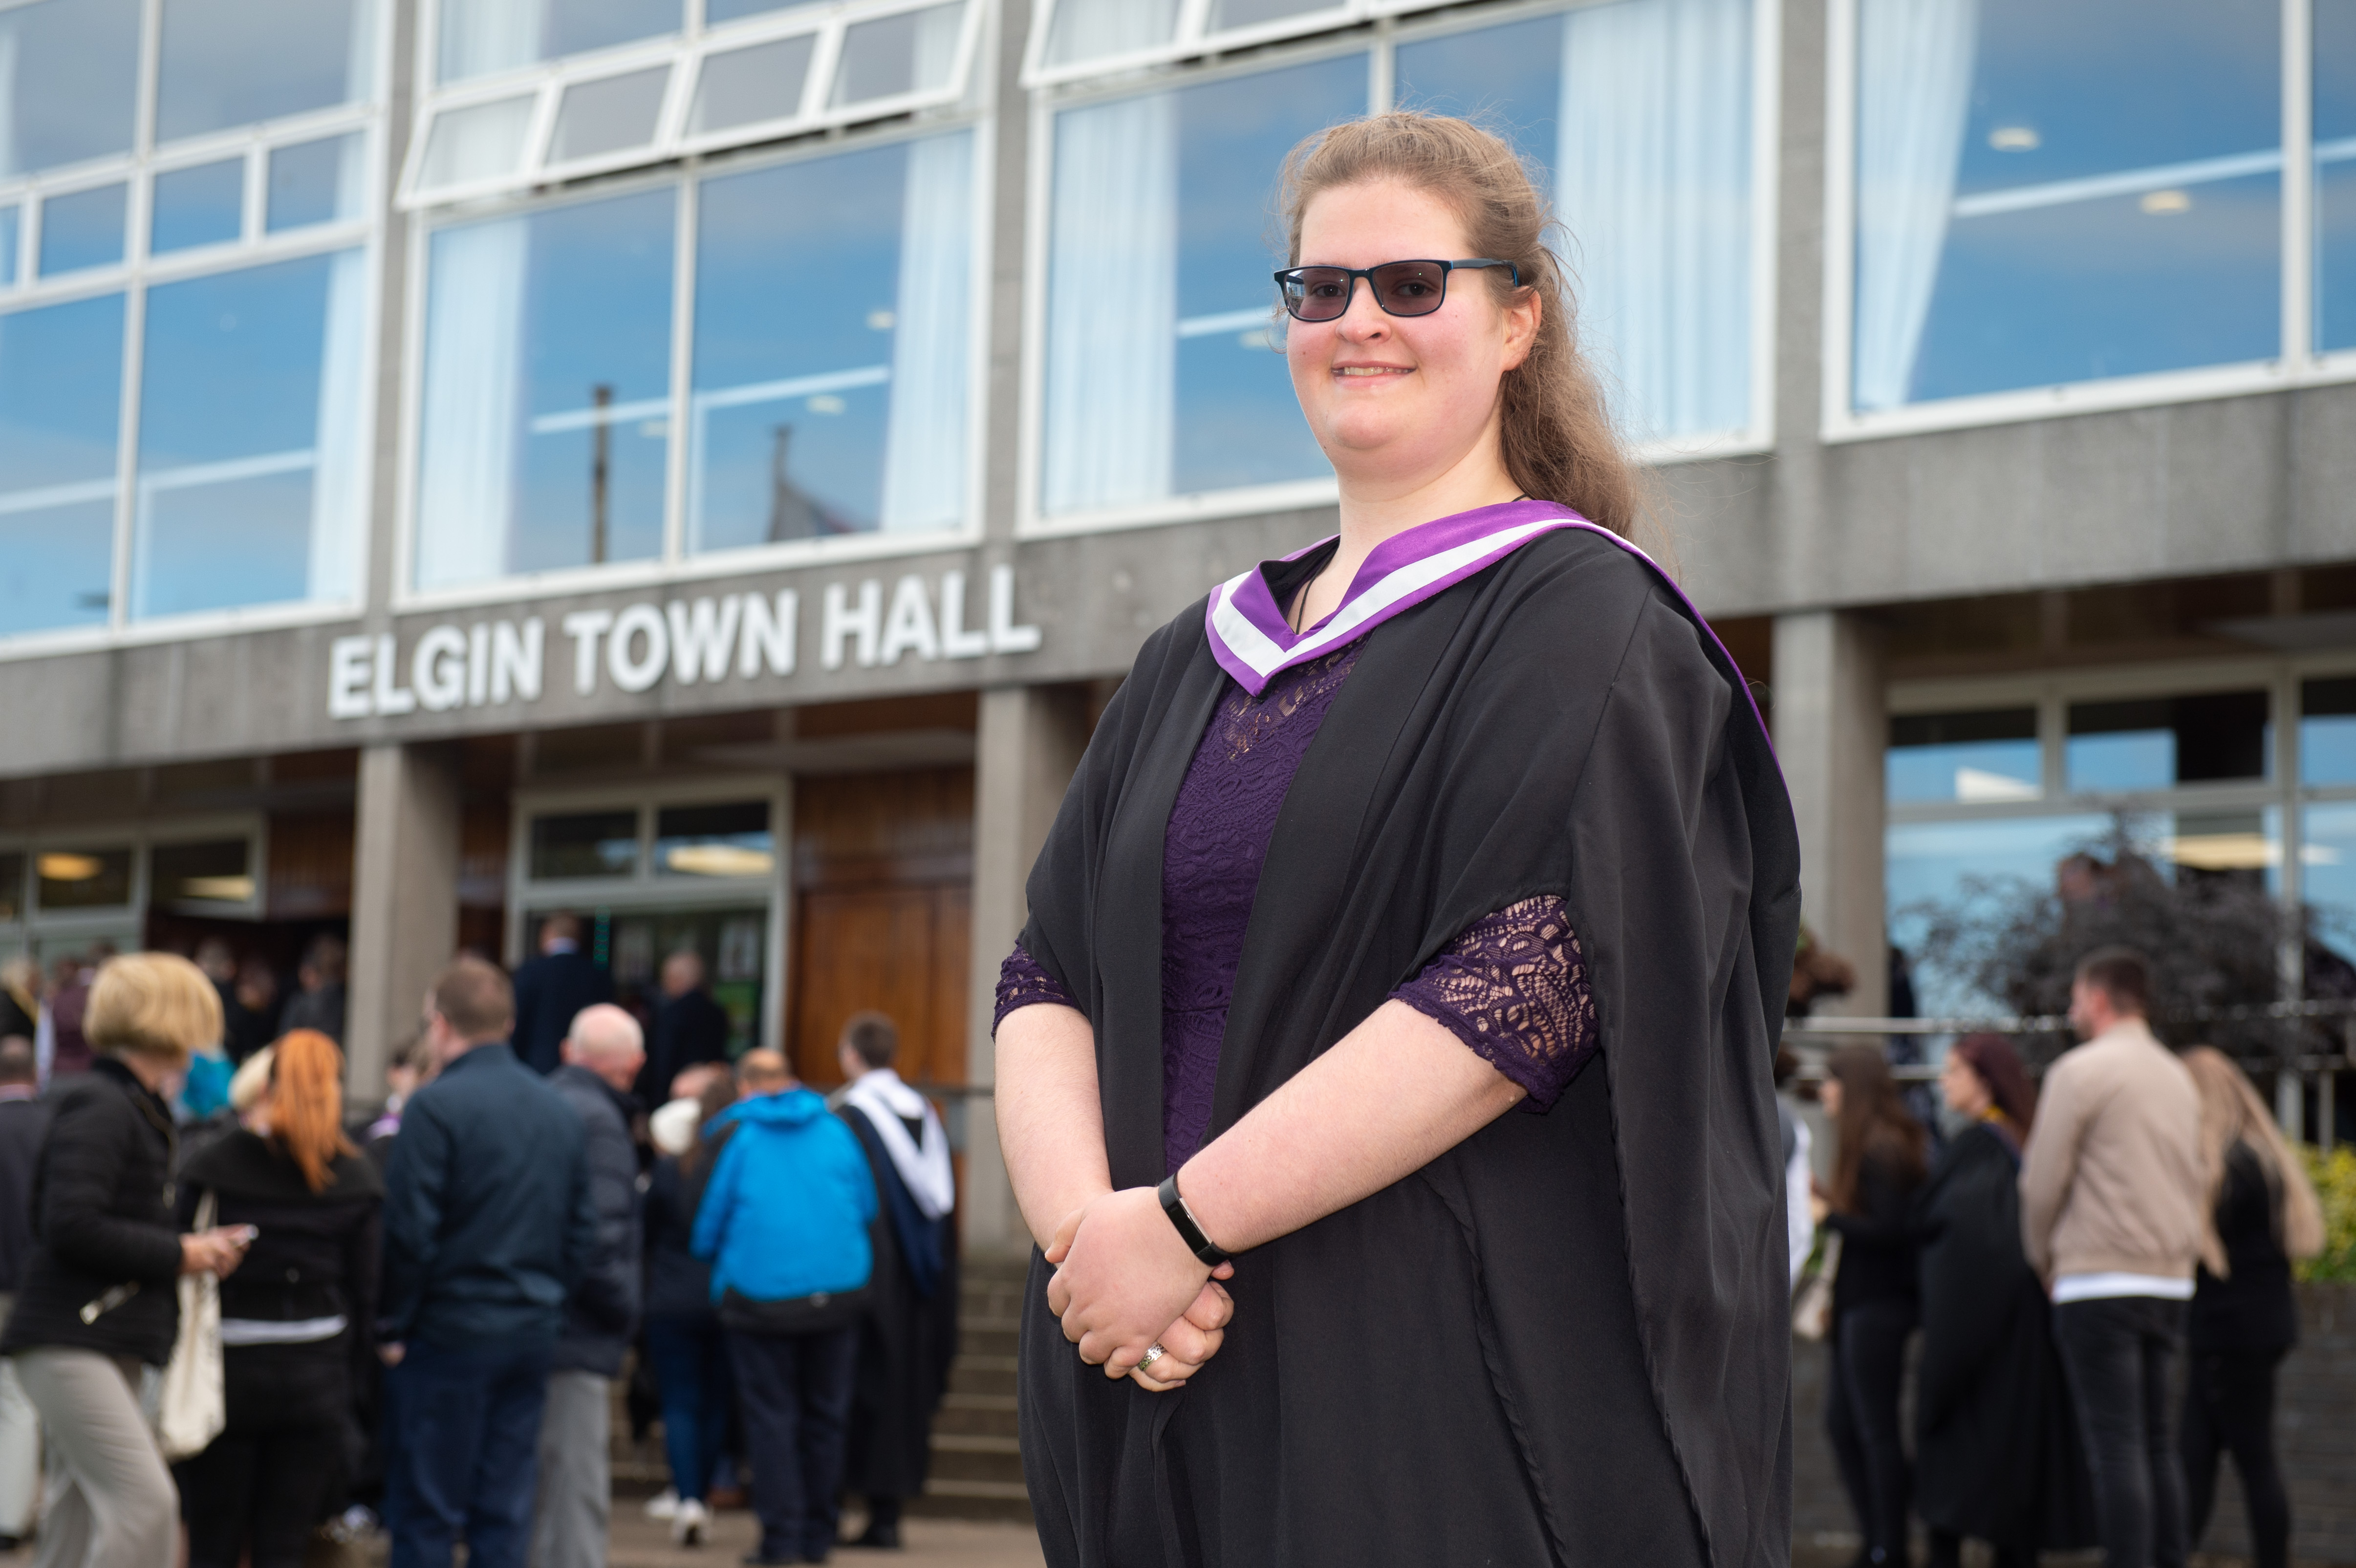 Rebecca Poyner pictured outside Elgin Town Hall.